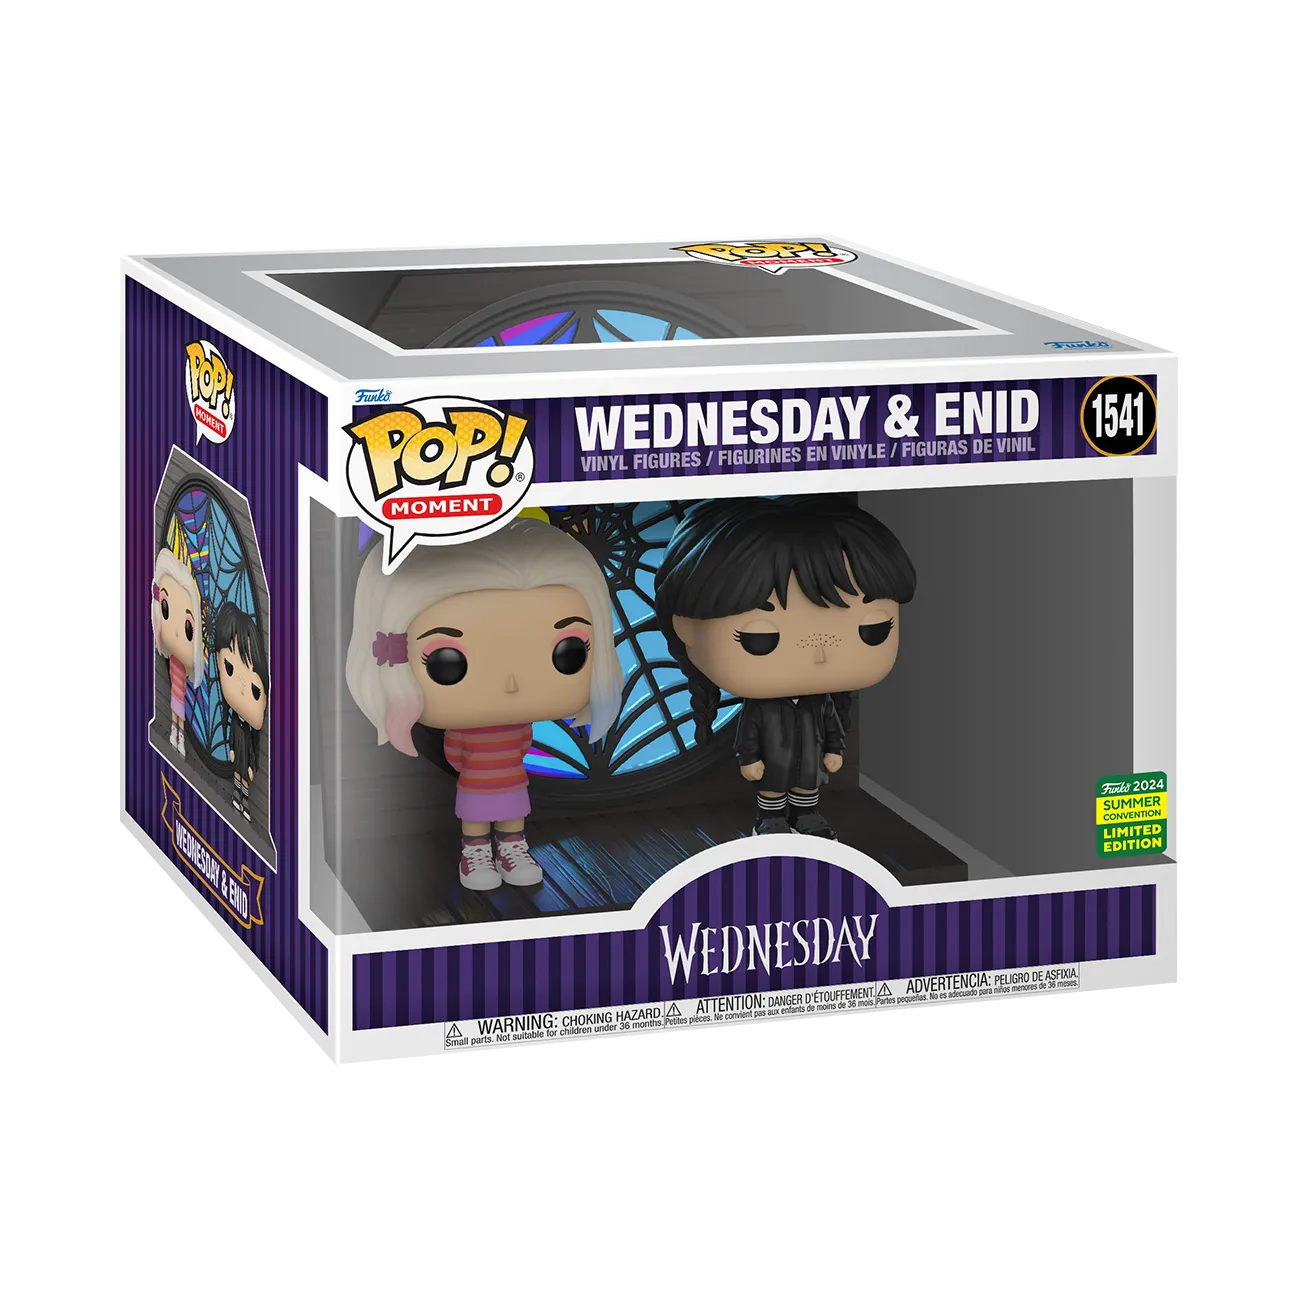 Wednesday (2022) - Wednesday & Enid Pop! Moment Vinyl (2024 Summer Convention Exclusive)